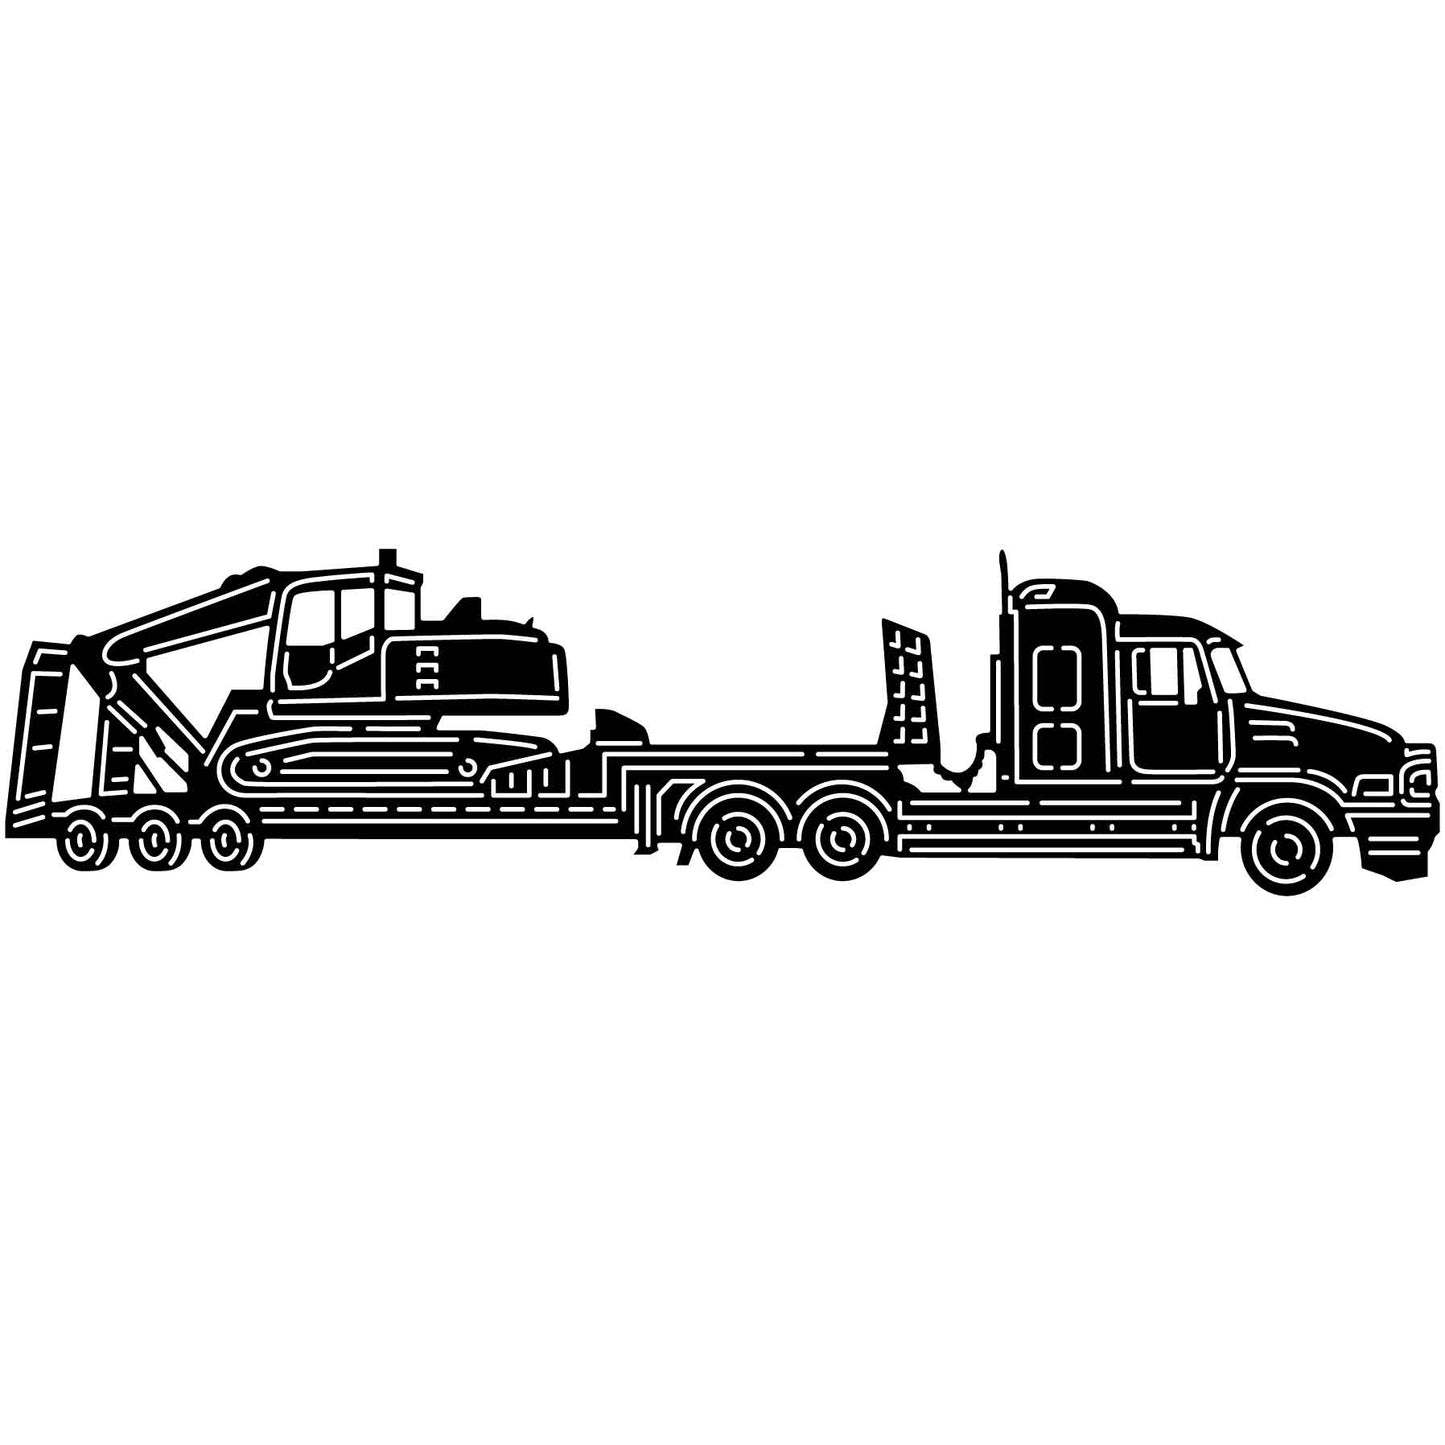 Truck and Excavator-DXF files cut ready for cnc machines-DXFforCNC.com